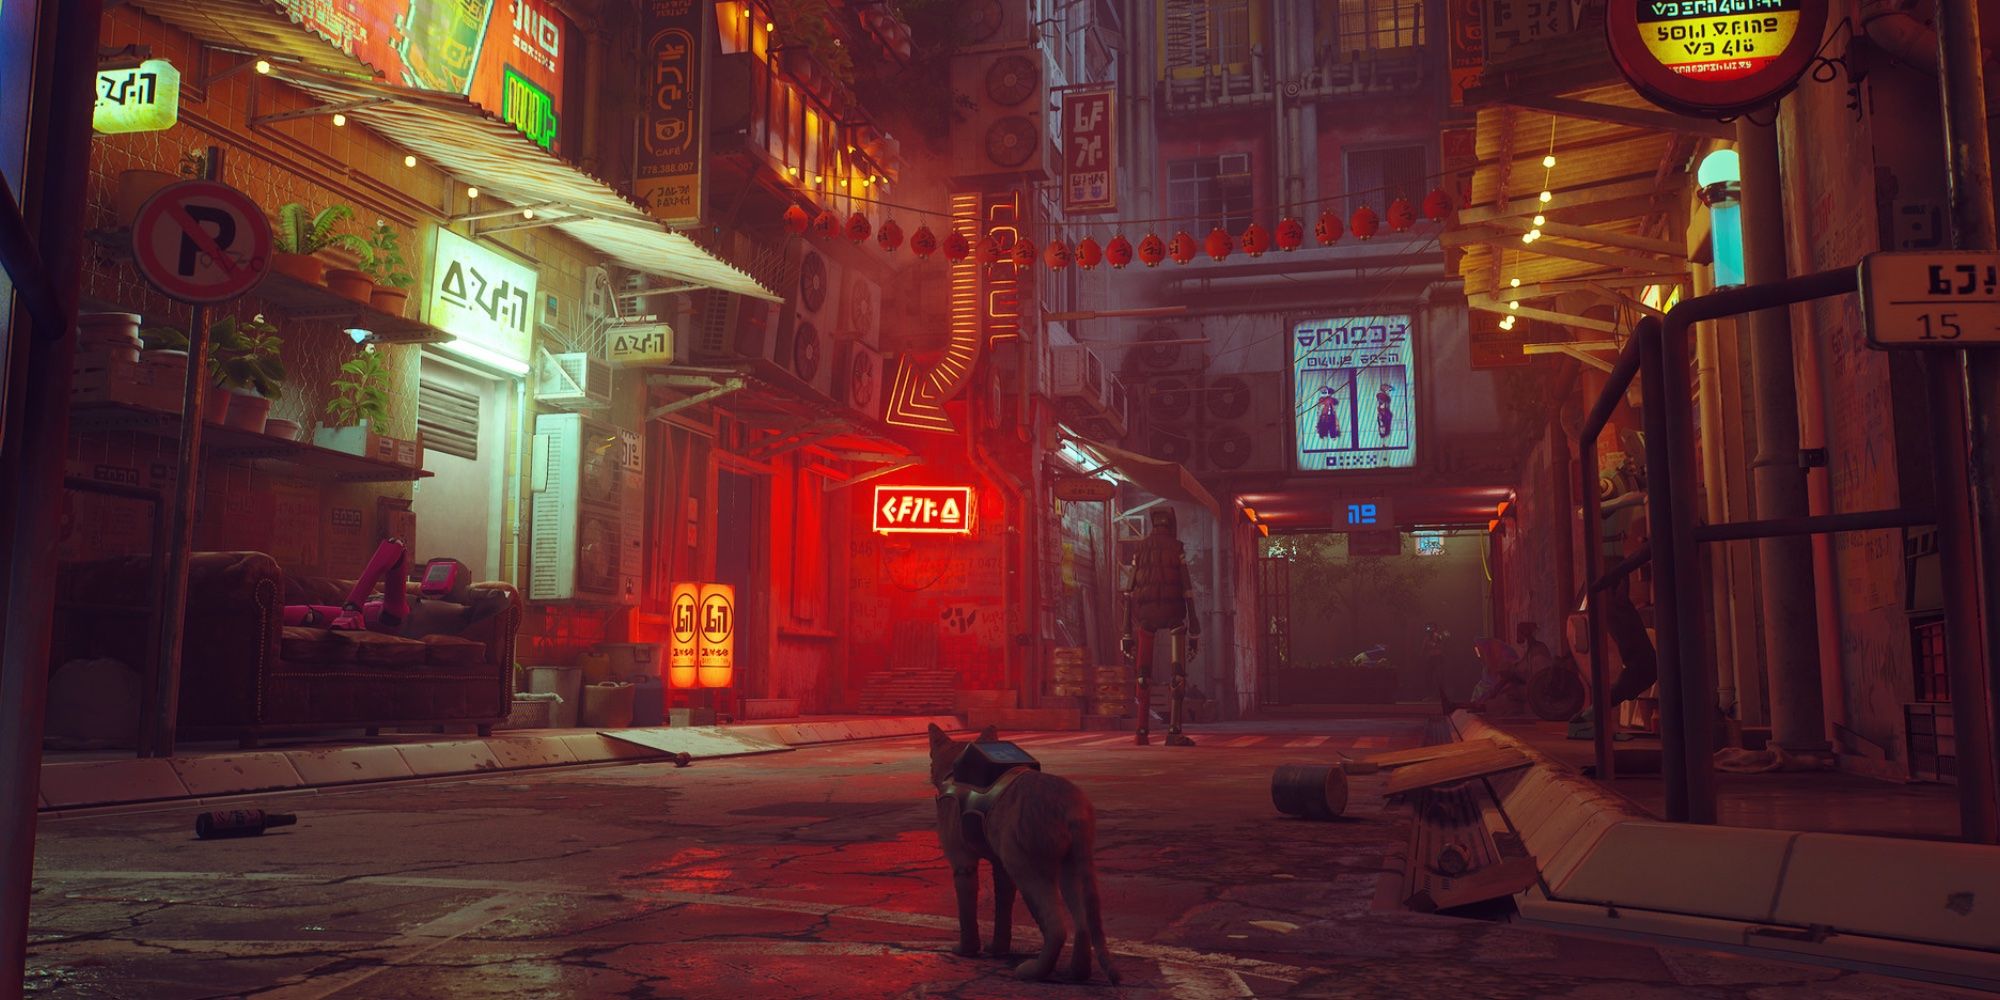 A cat in the middle of a dimly lit street, with a couple of neon signs in the distance